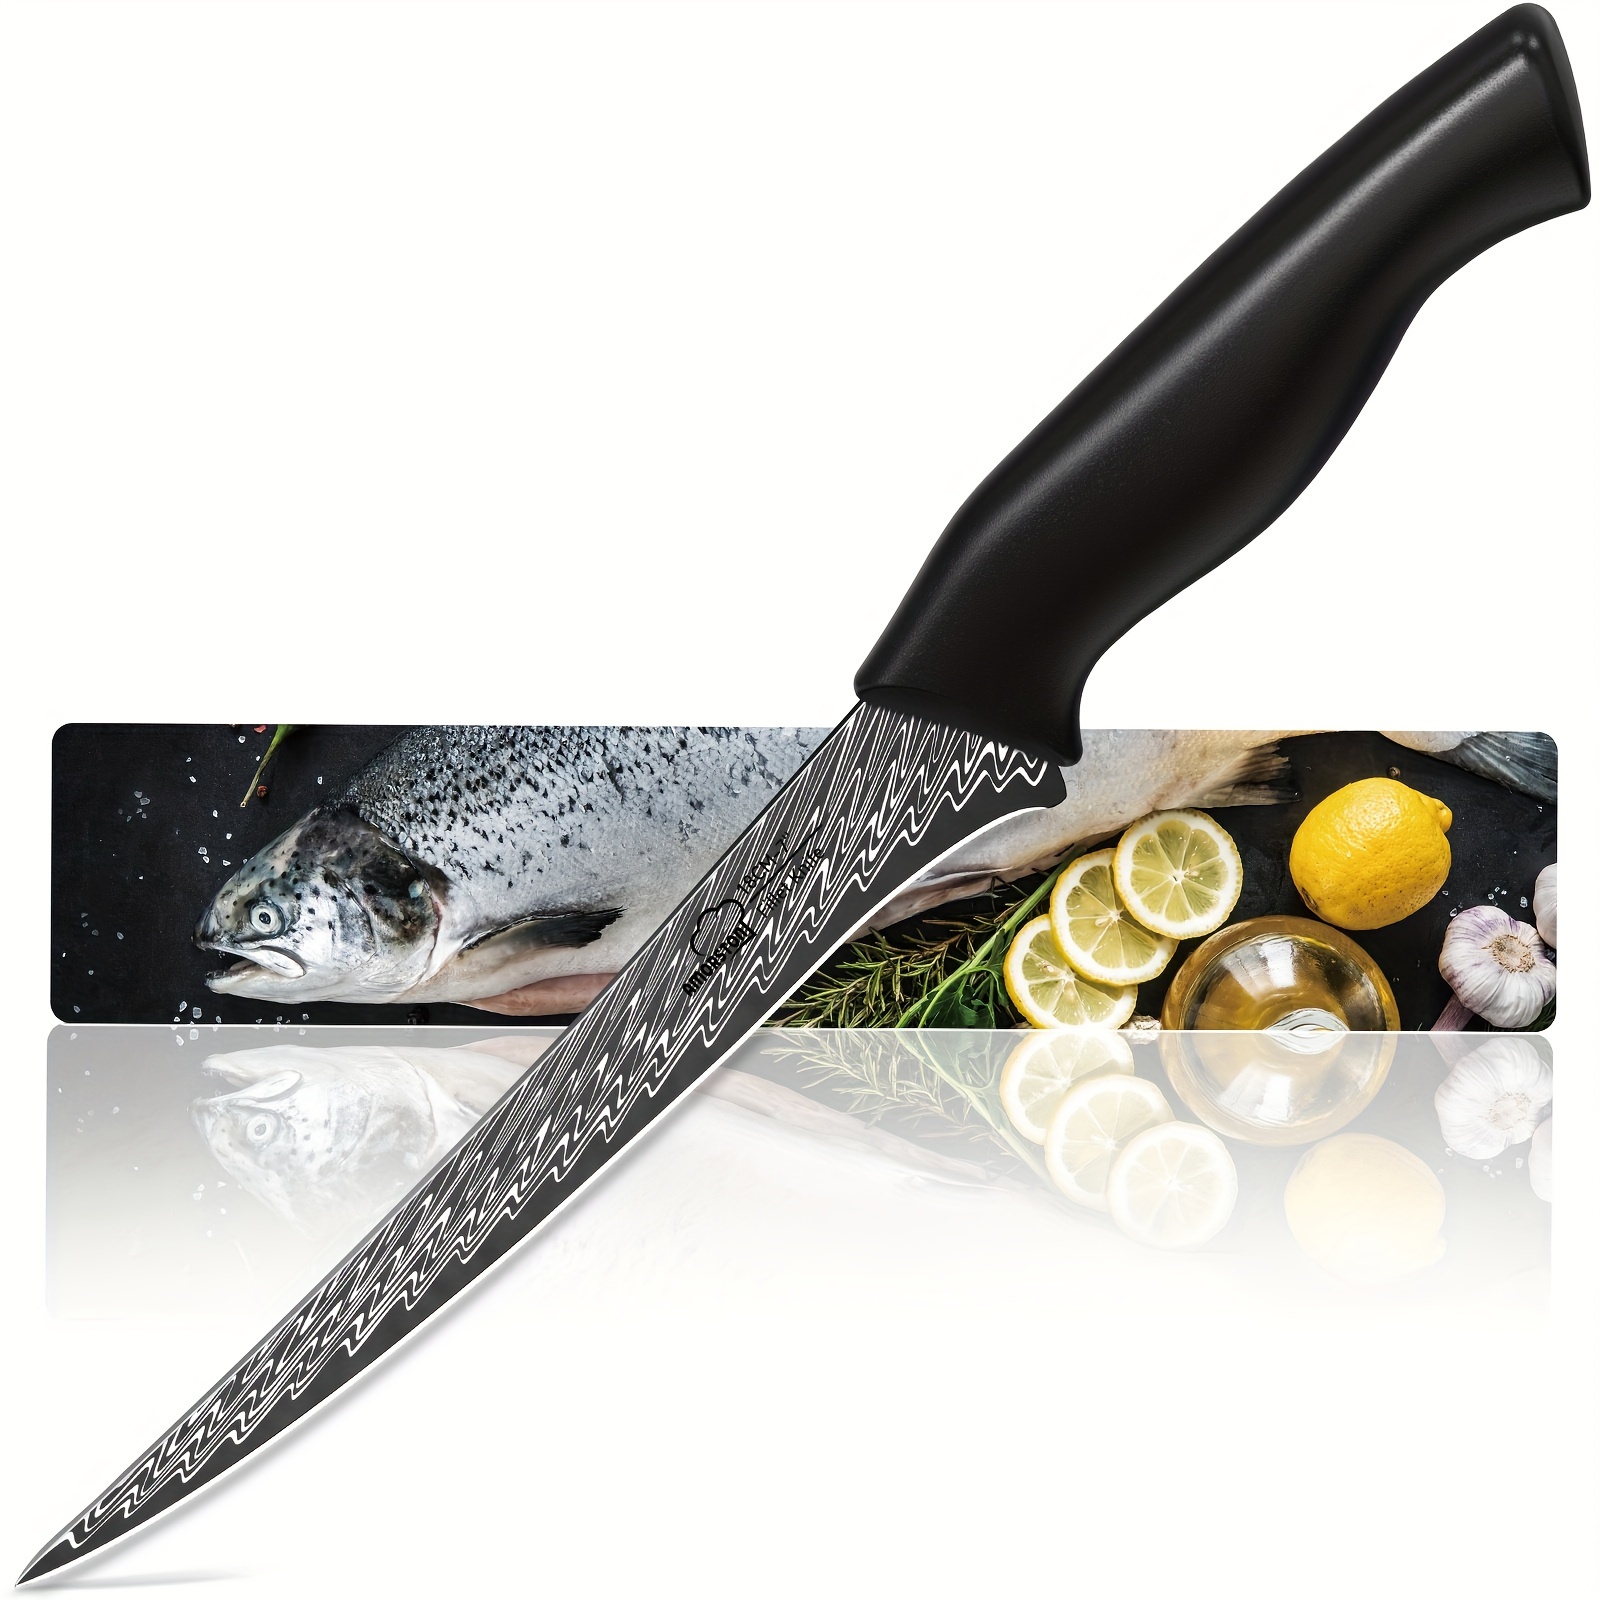 

1pc/fish Fillet Knife, 7" Fishing Knife, German Stainless Steel, Filet Knife For Fish And Boning Knife For Meat Cutting, Dishwasher Safe